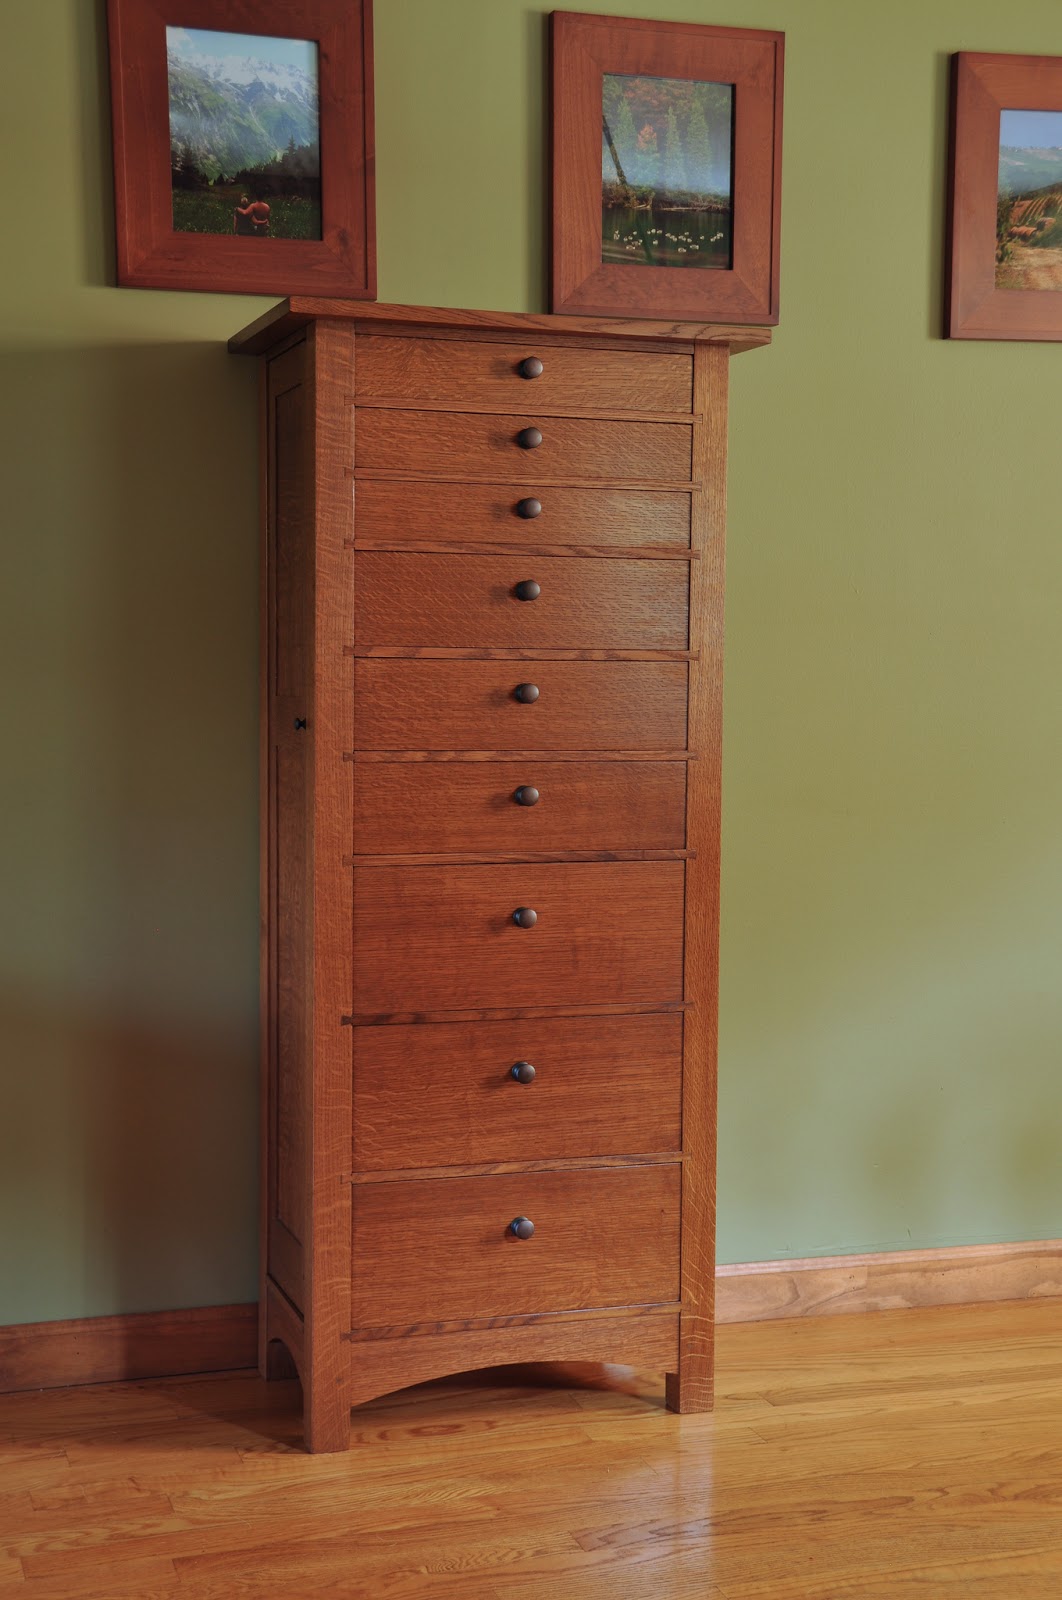 Honey Do Woodworking: Jewelry Armoire / Lingerie Chest ...